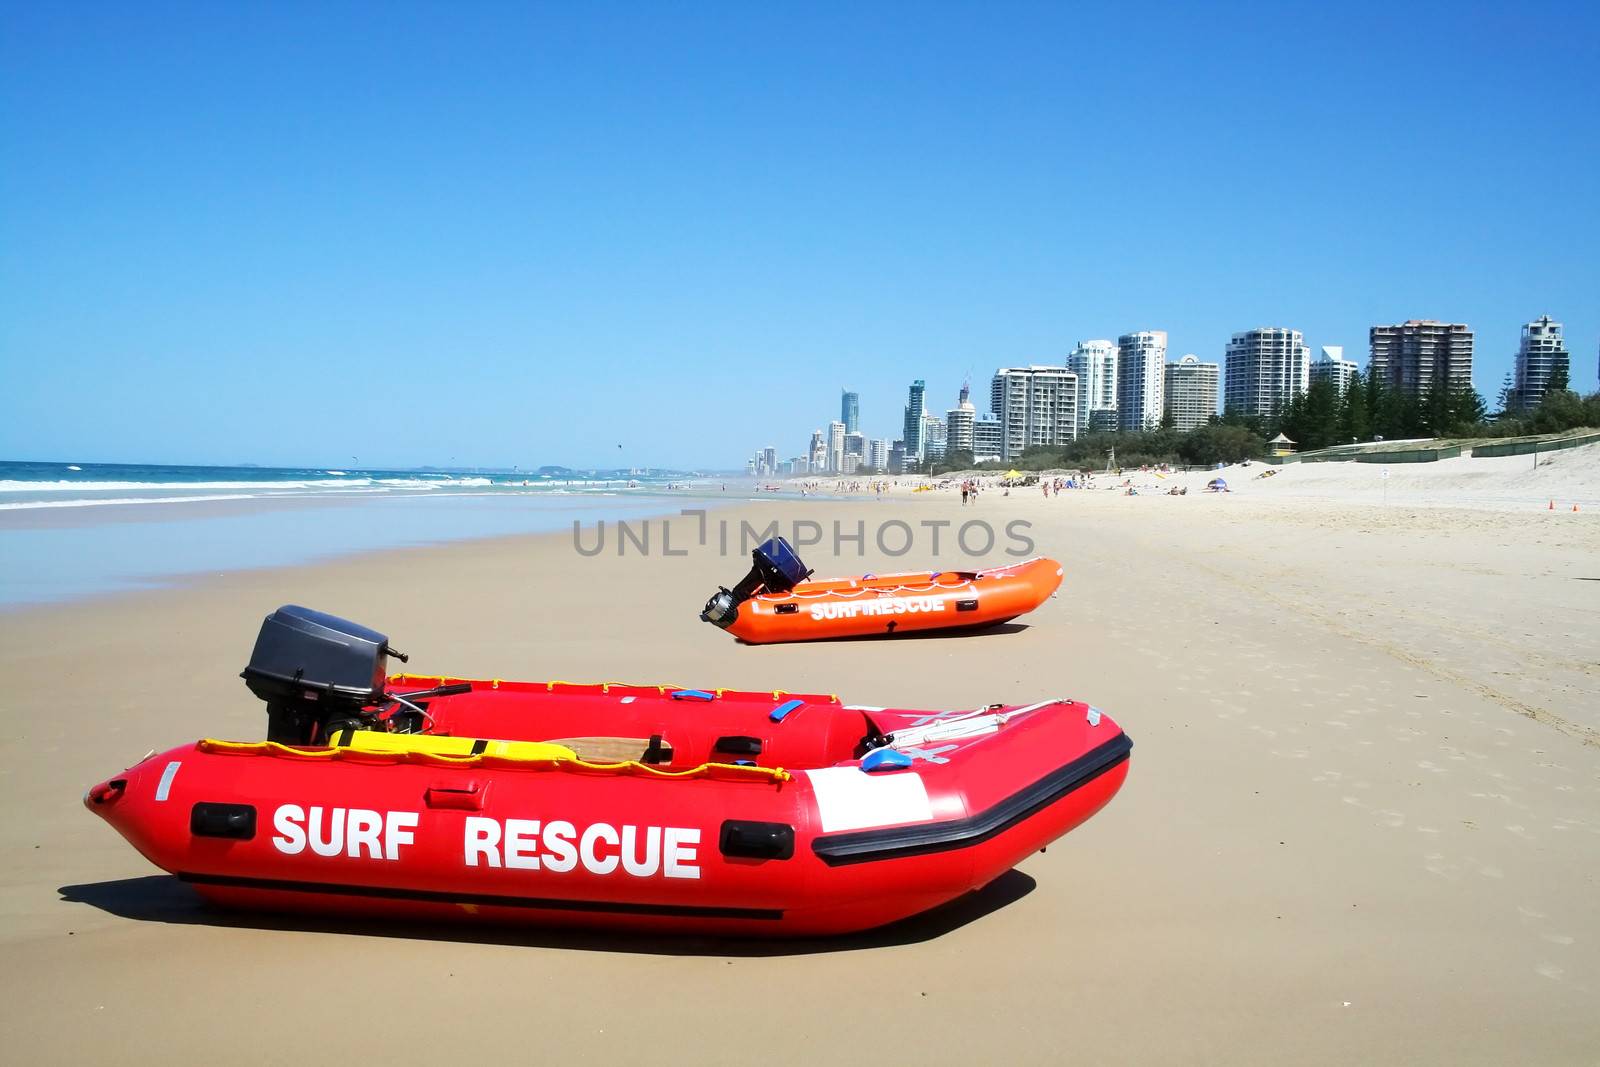 Surf rescue boats on Southport beach looking towards Surfers Paradise on the Gold Coast Australia.